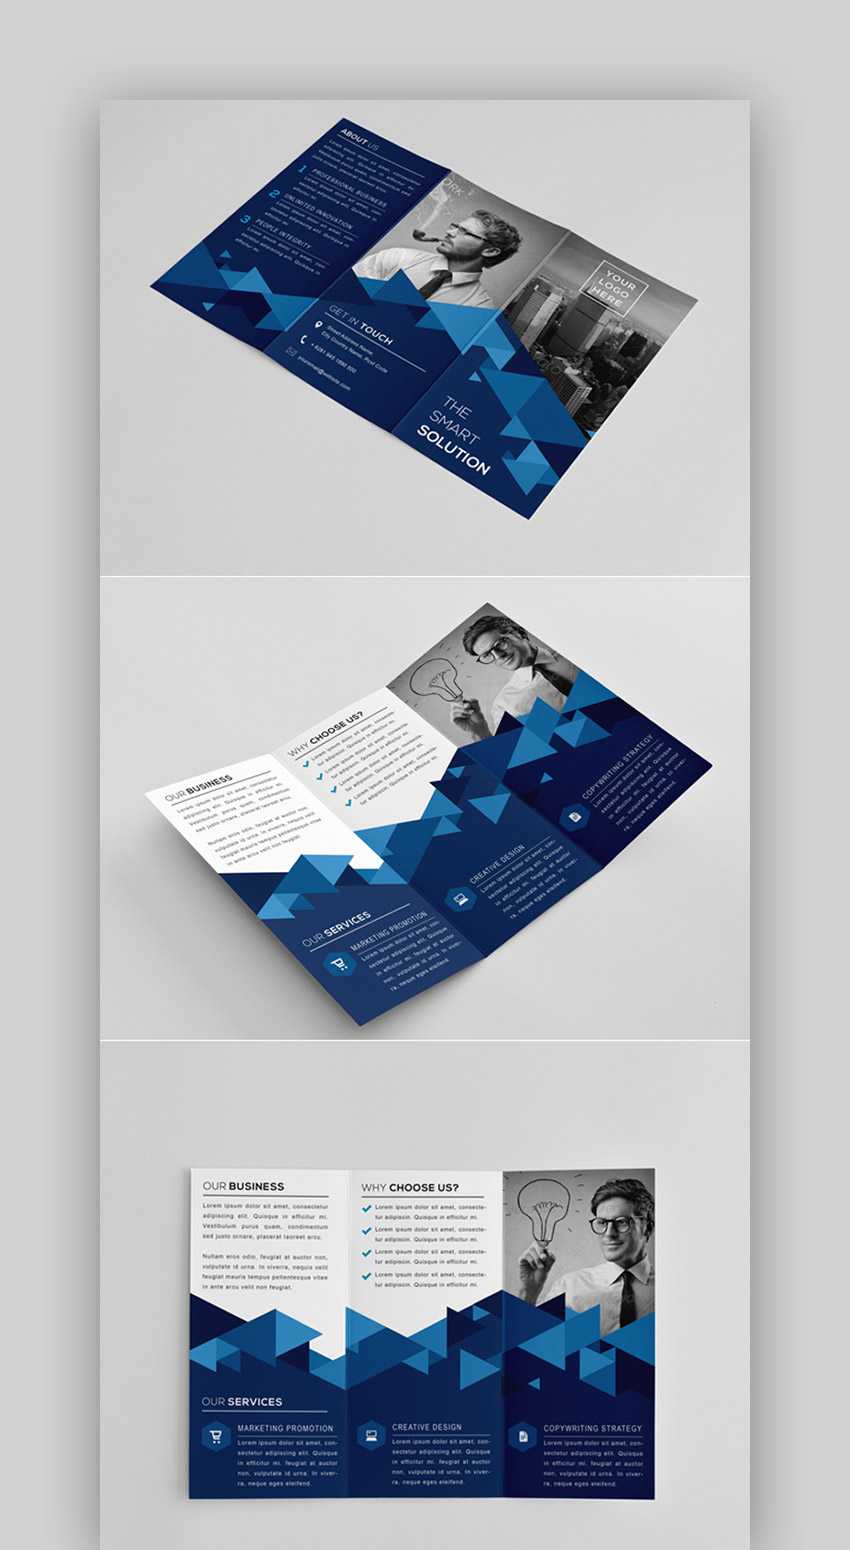 016 Tri Fold Brochure Template Indesign The Modern Intended For Tri Fold Brochure Template Indesign Free Download